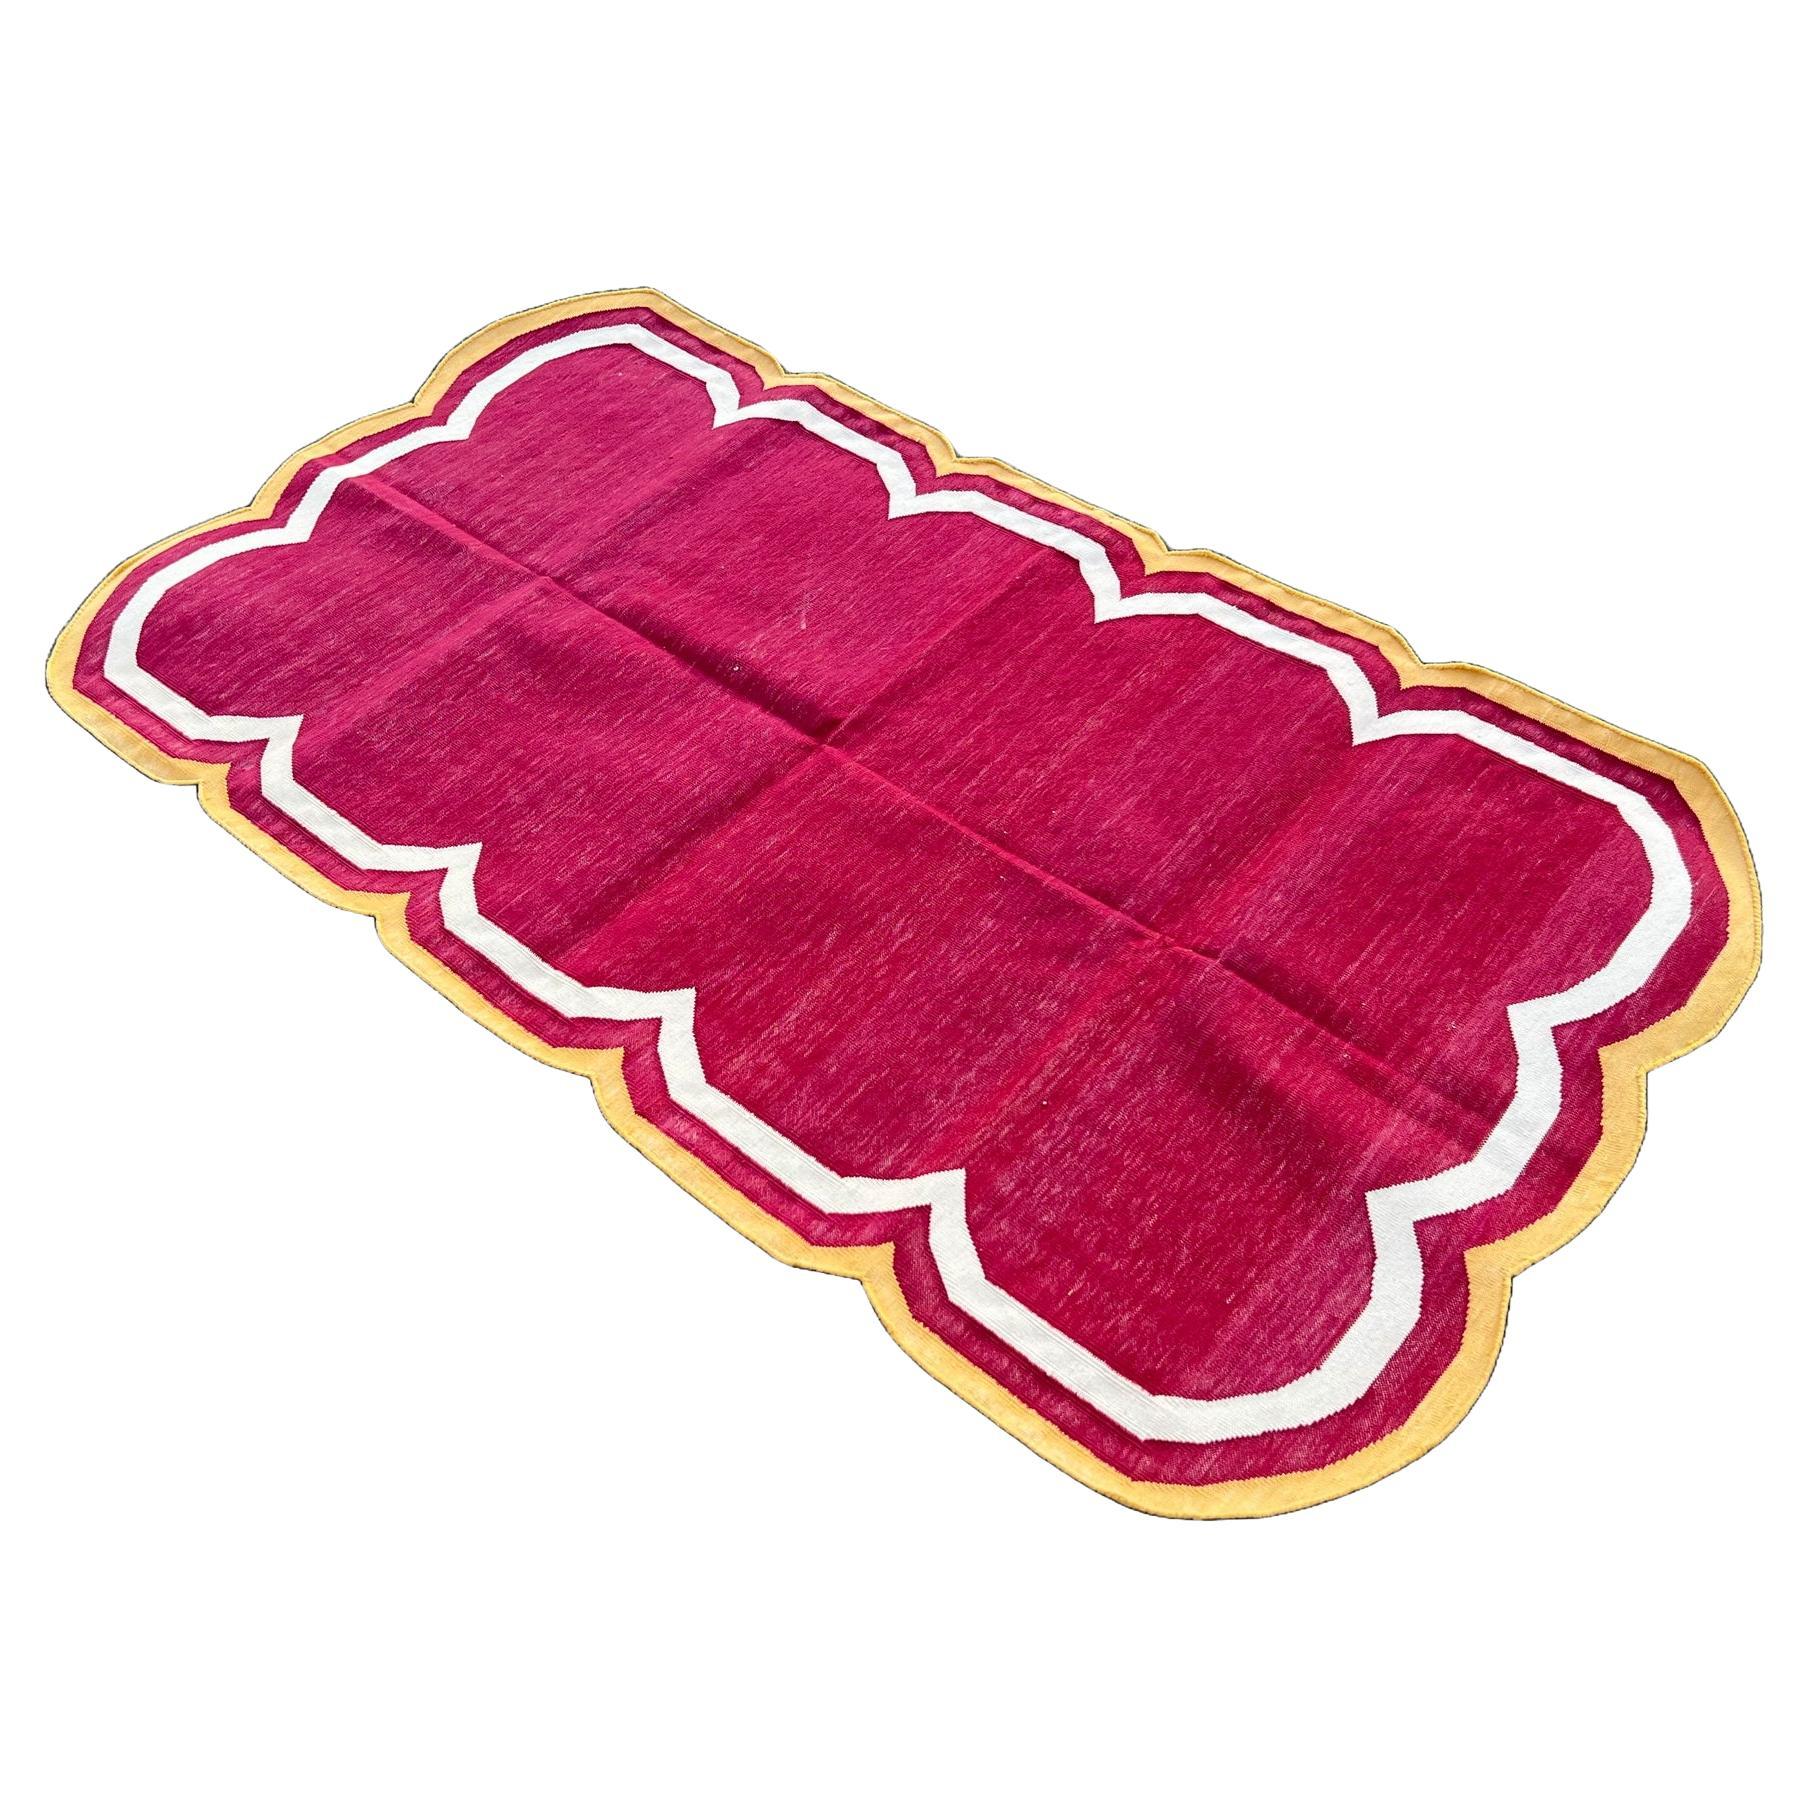 Handmade Cotton Area Flat Weave Rug, 3x5 Pink And Yellow Scalloped Kilim Dhurrie For Sale